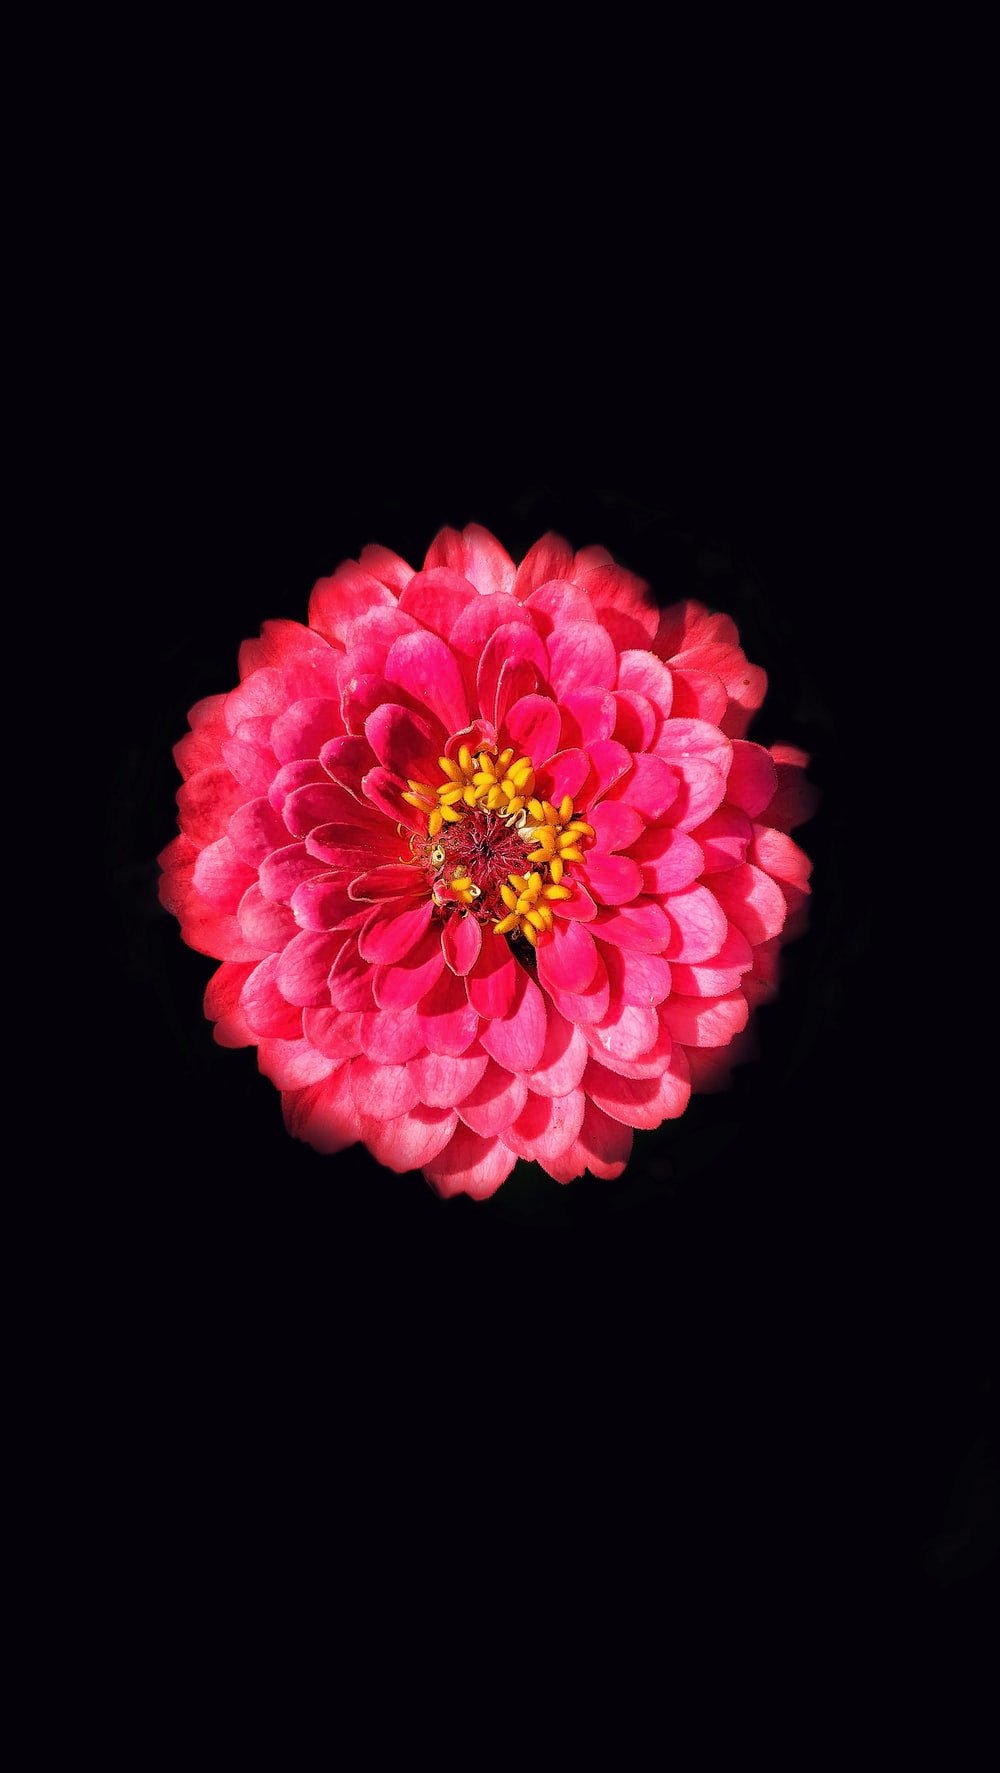 pink flower with black background photo